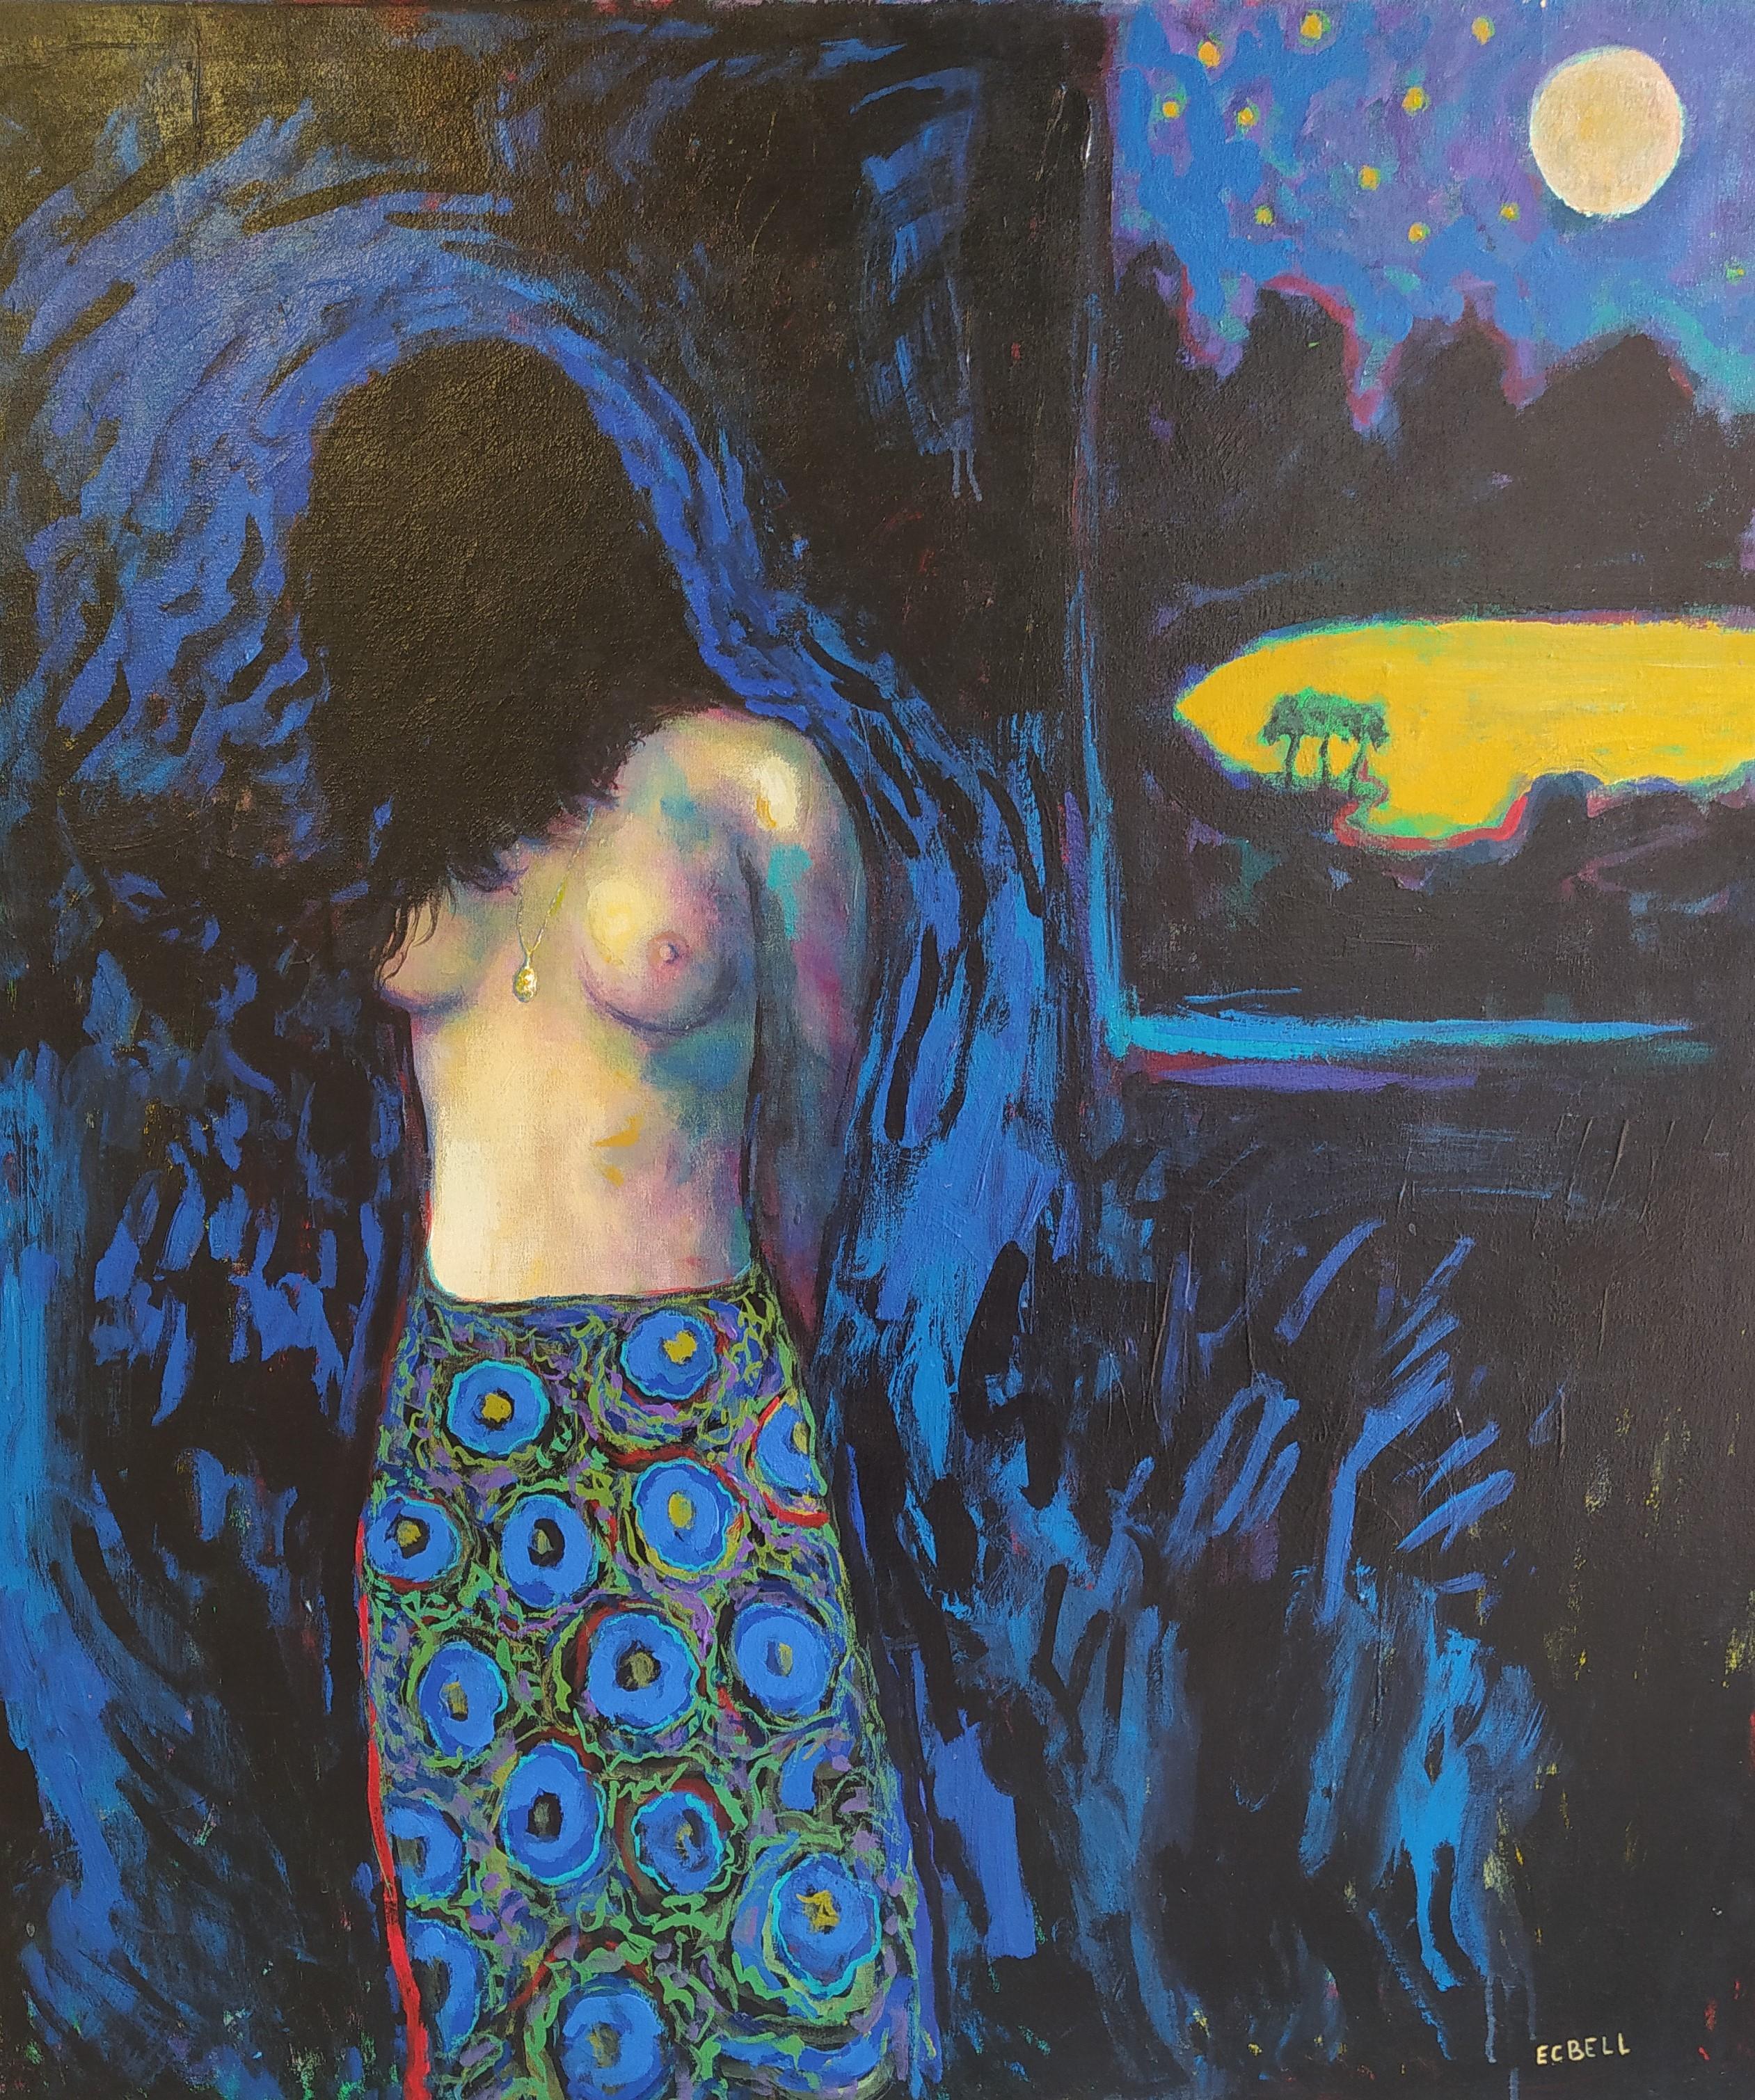 E.C. Bell Nude Painting - "Silverlake"- Vertical expressionist semi-nude with landscape in blue and black.